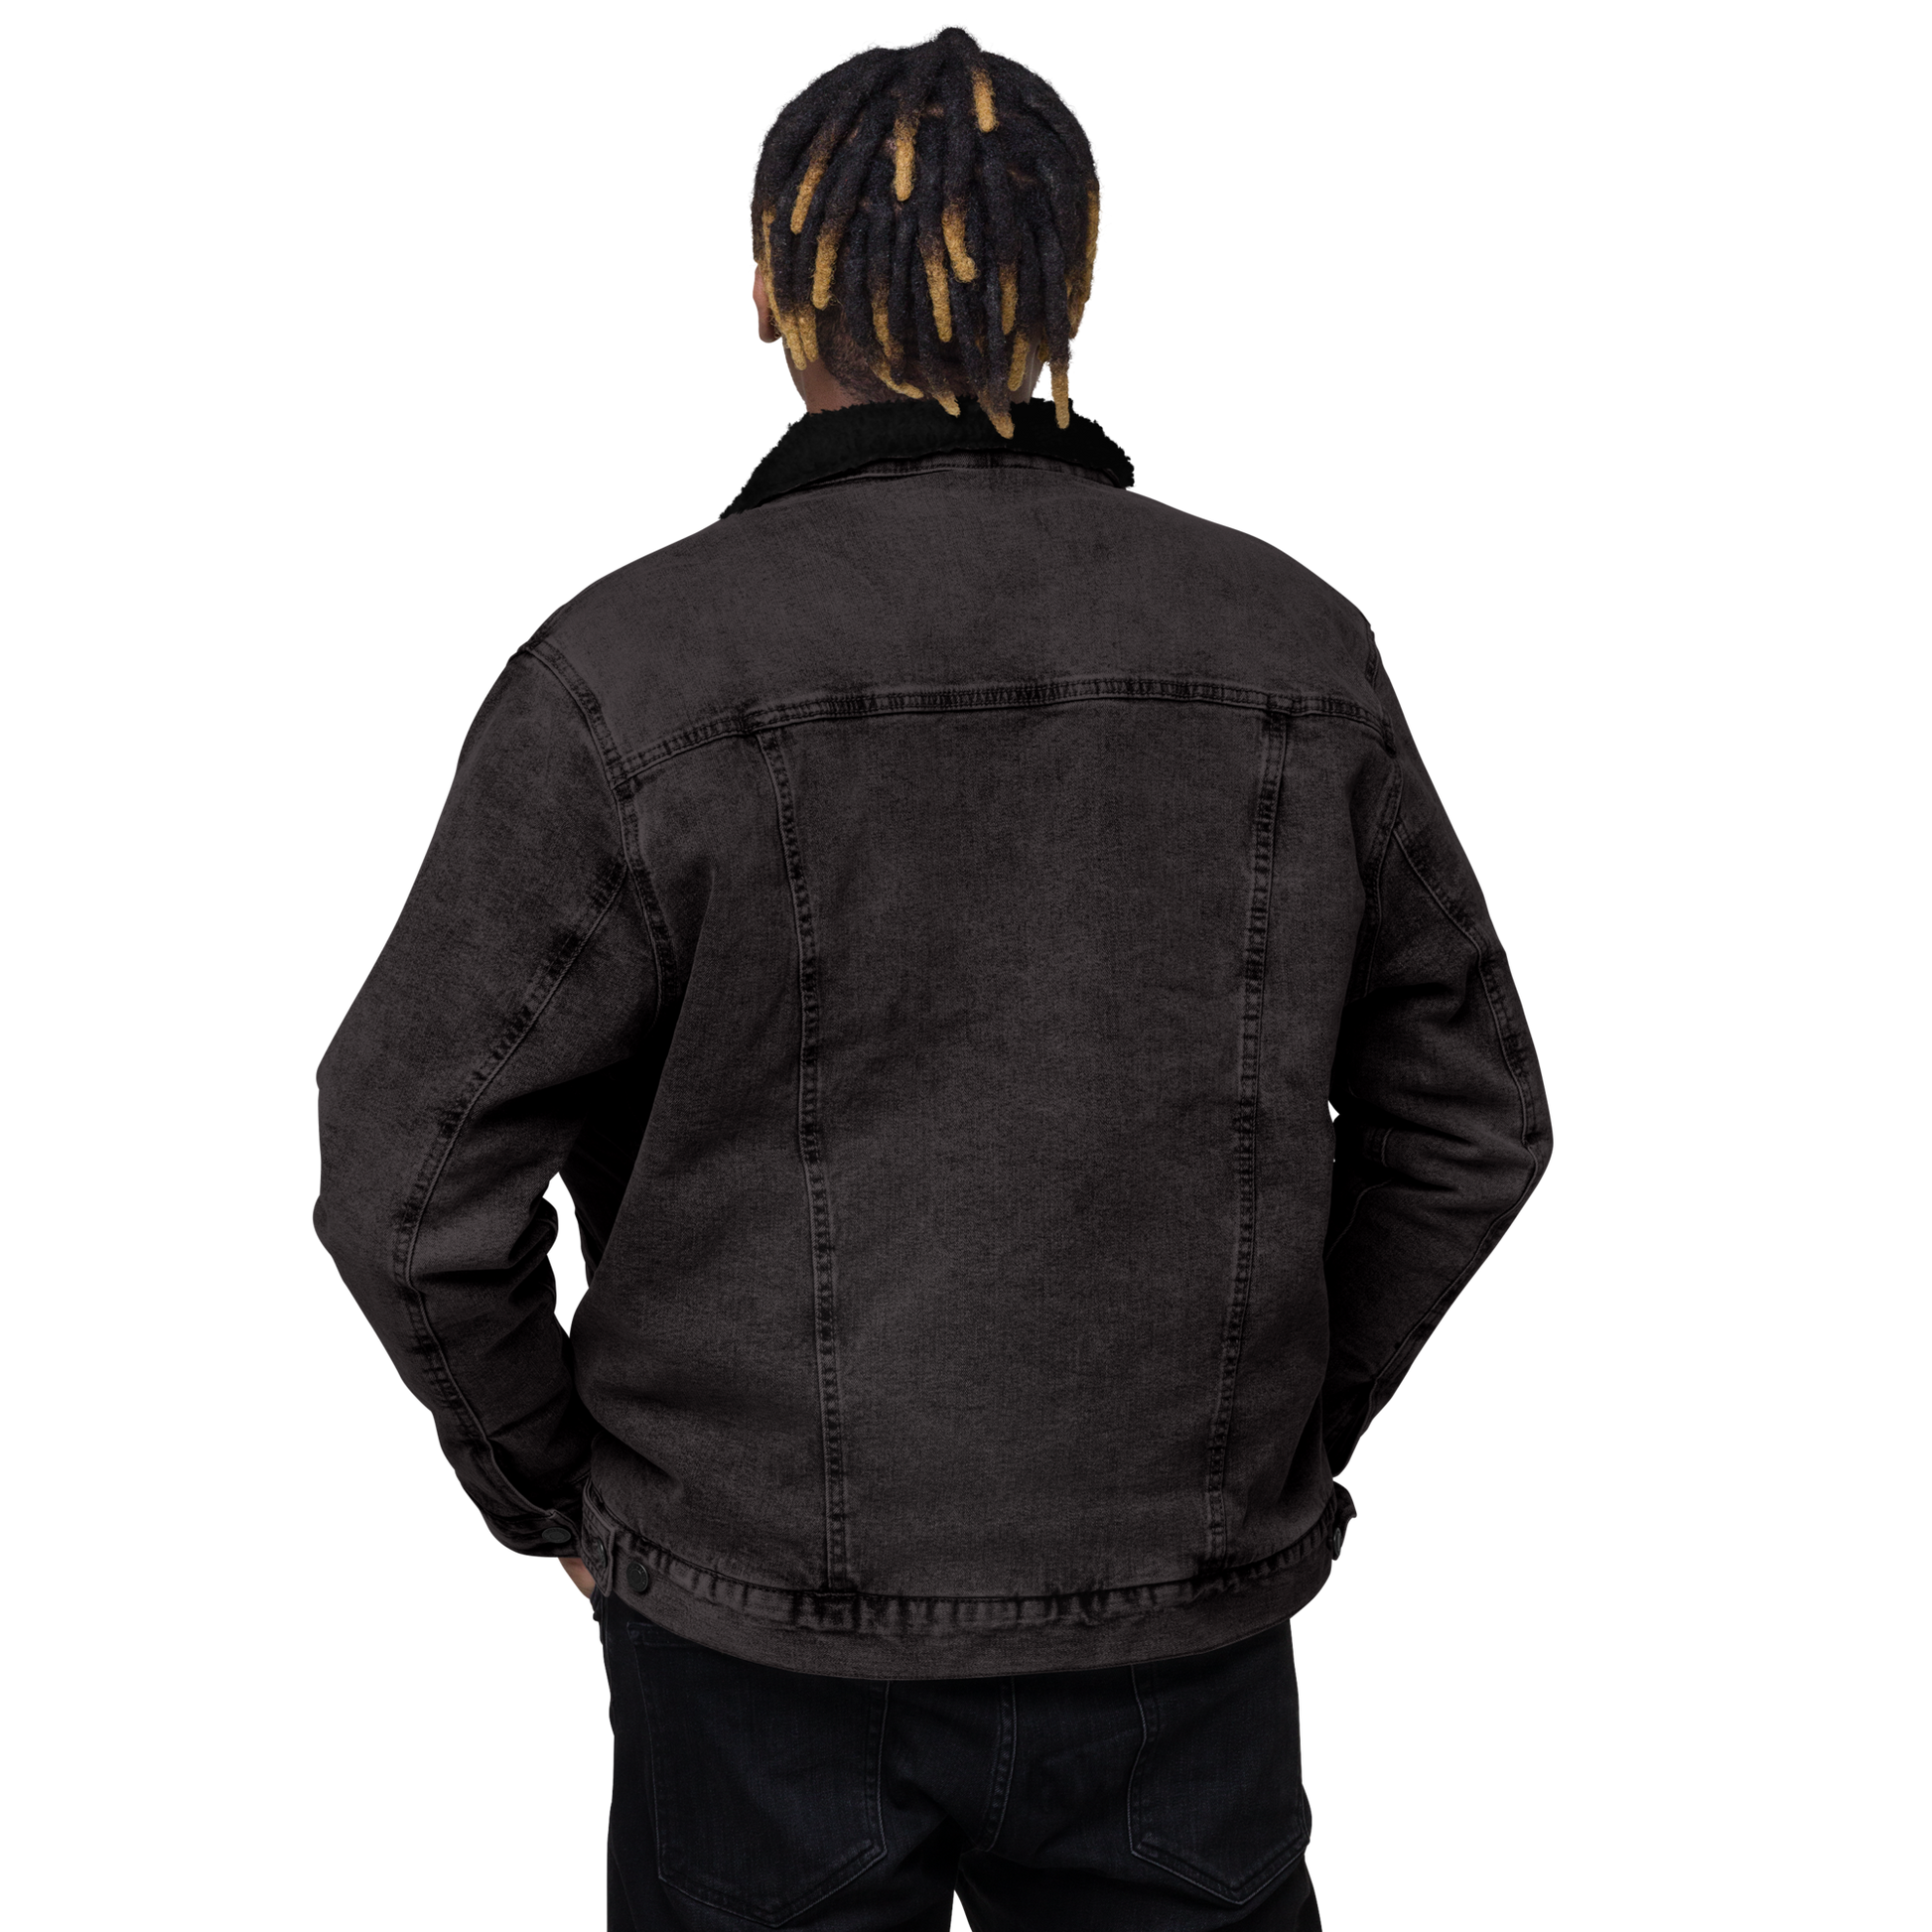 YHM Designs - YQB Quebec City Denim Sherpa Jacket - Crossed-X Design with Airport Code and Vintage Propliner - Black & White Embroidery - Image 09